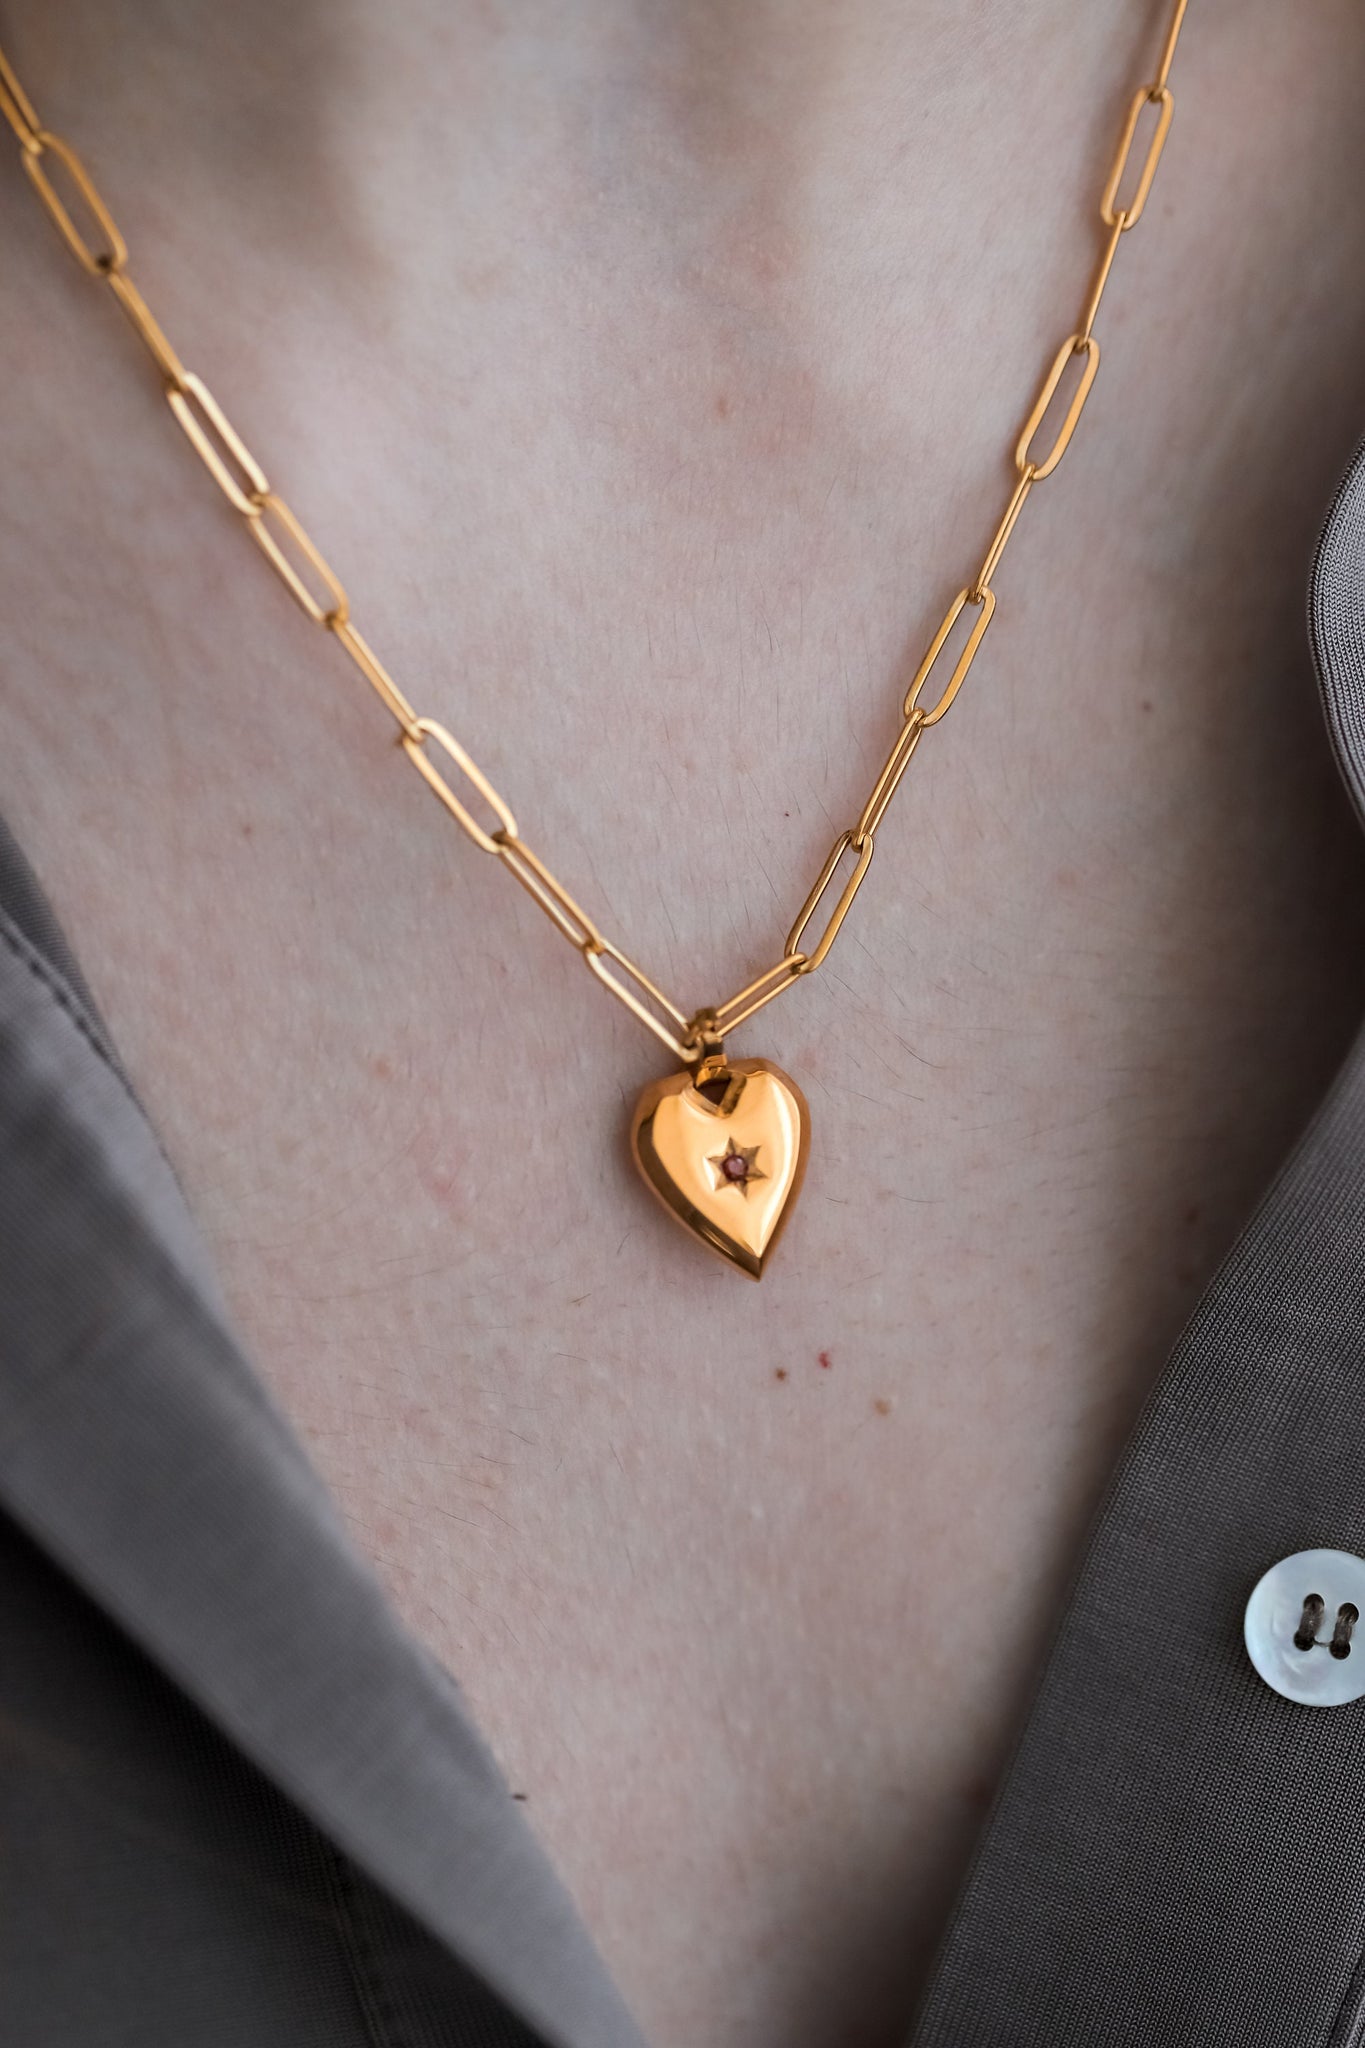 Star Heart Pendant Necklace, 18K Gold, Necklaces For Women, Minimalist Necklace,Paper Pin Stainless Steel Necklace,Gift For Mom,Gift For Her